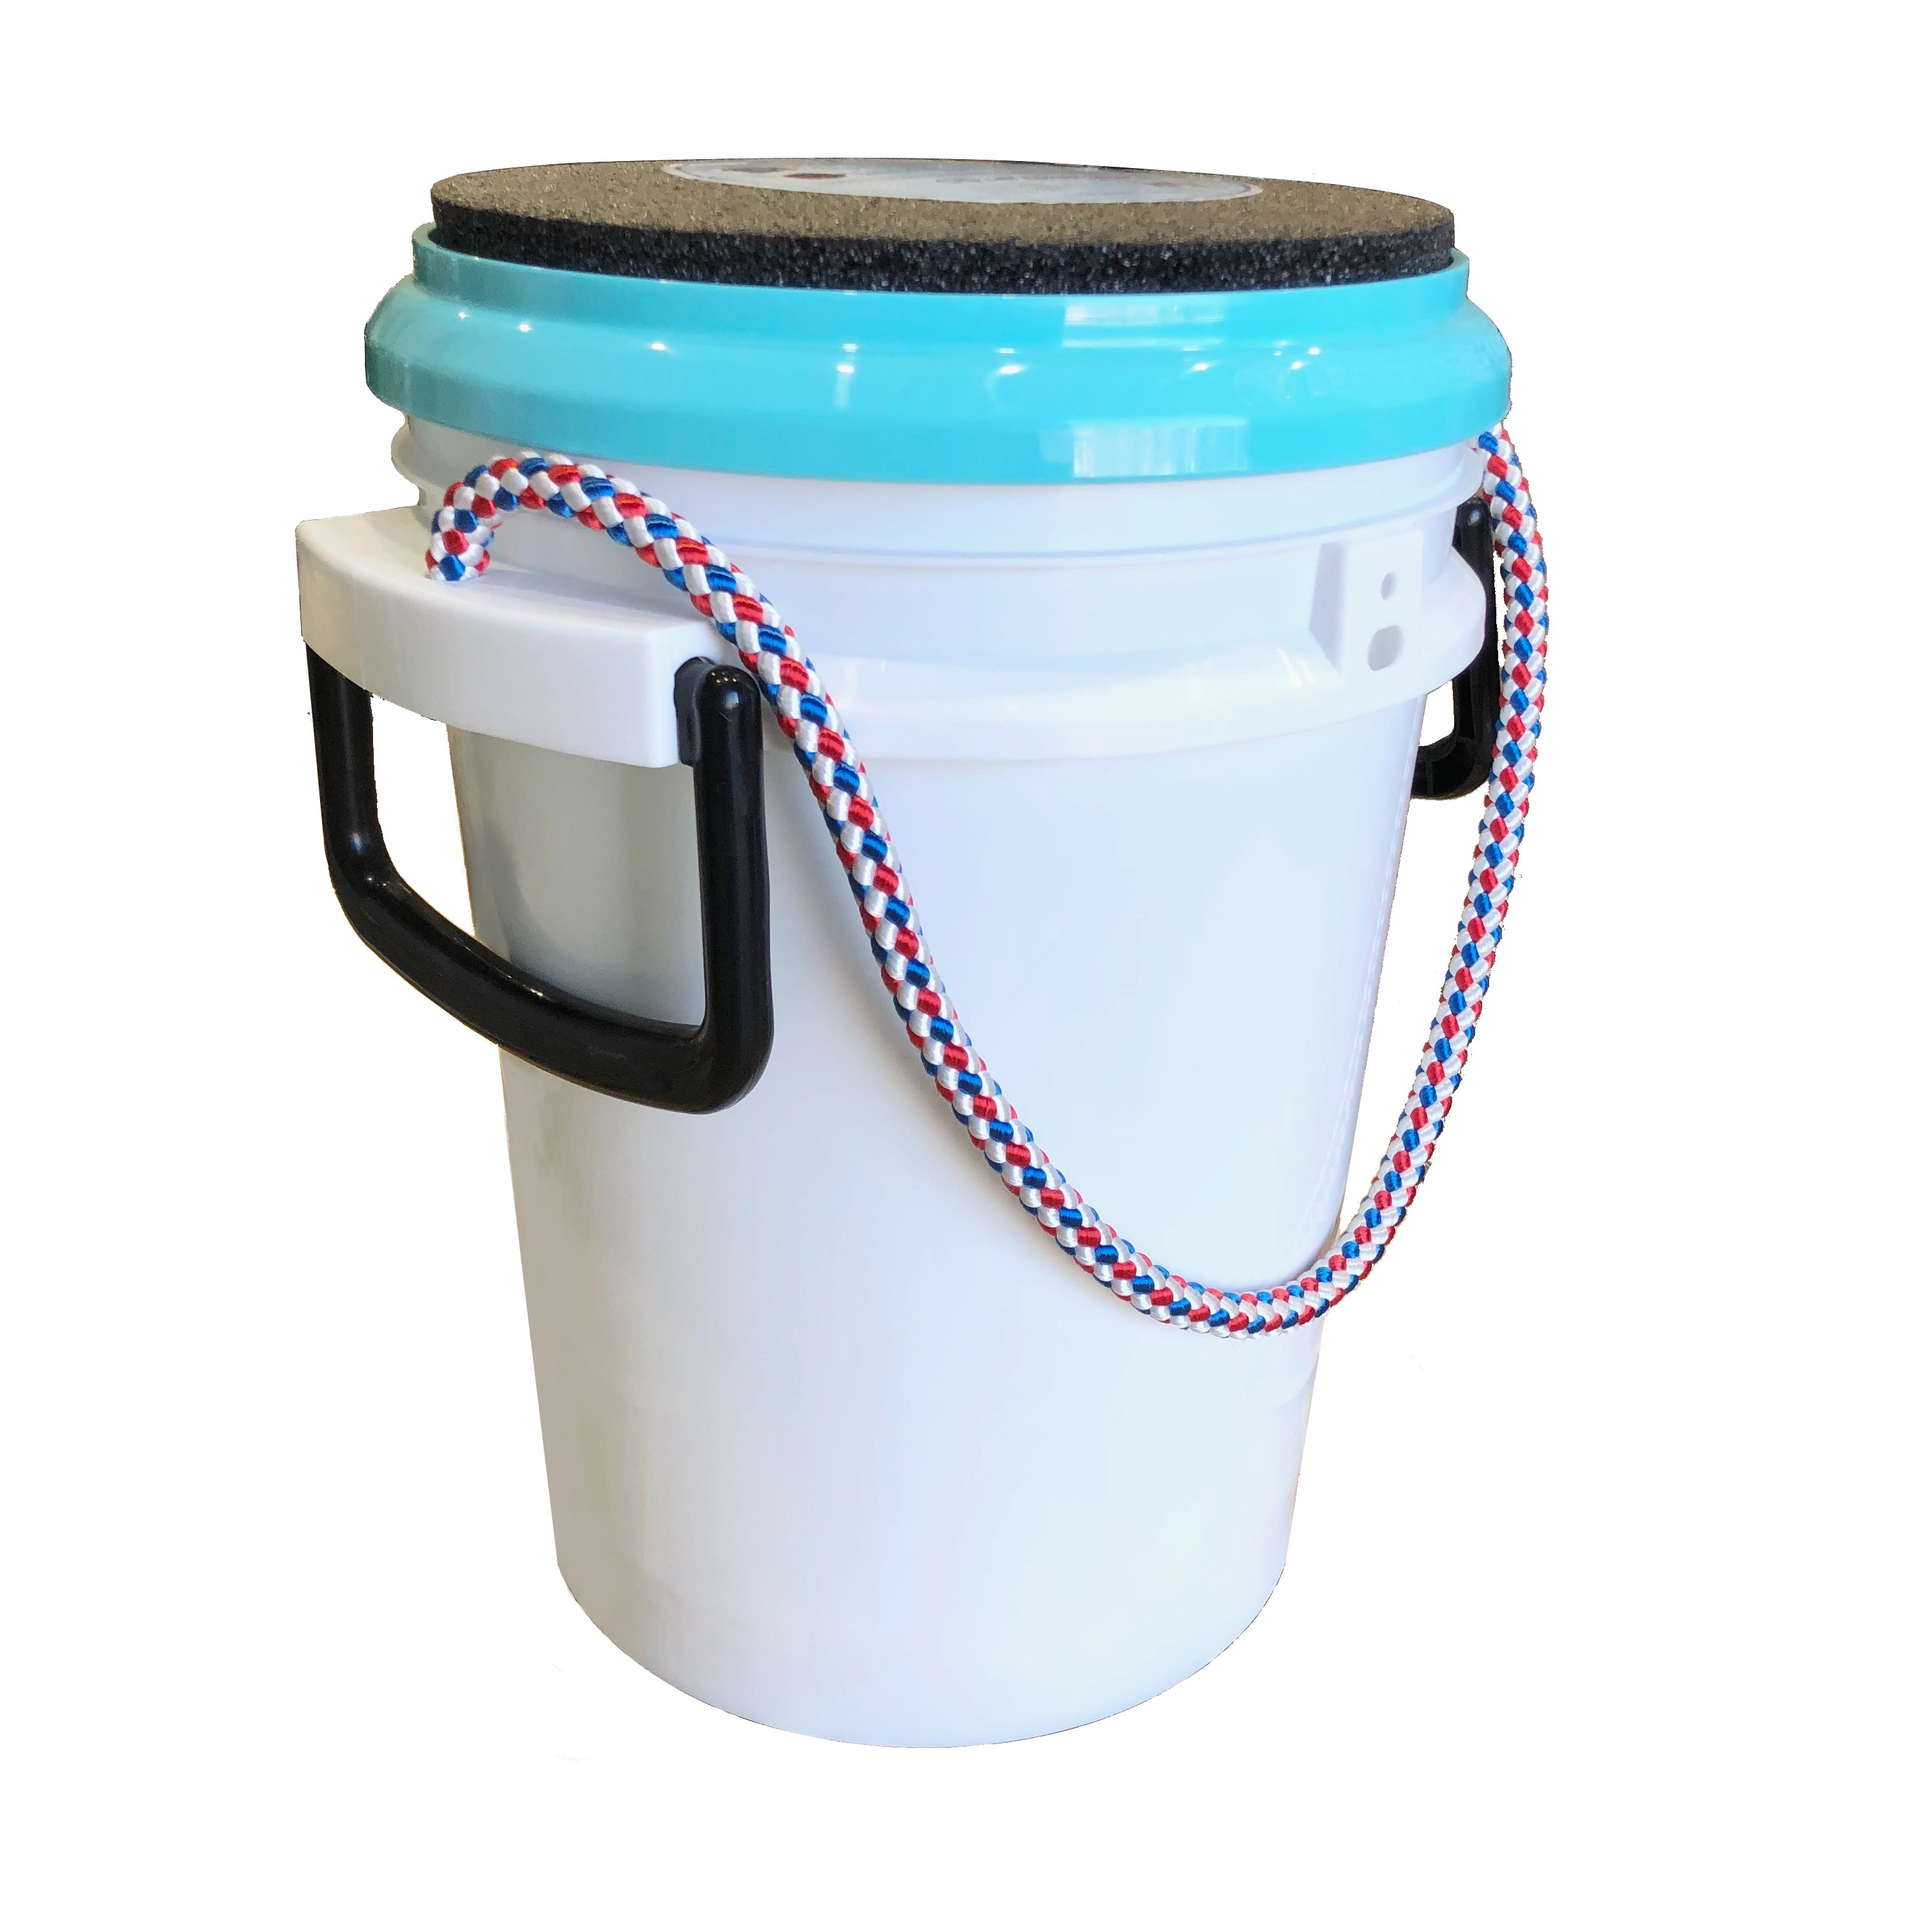 Fisherbrand EVA Foam Ice Pans and Buckets with Lids 1 L capacity